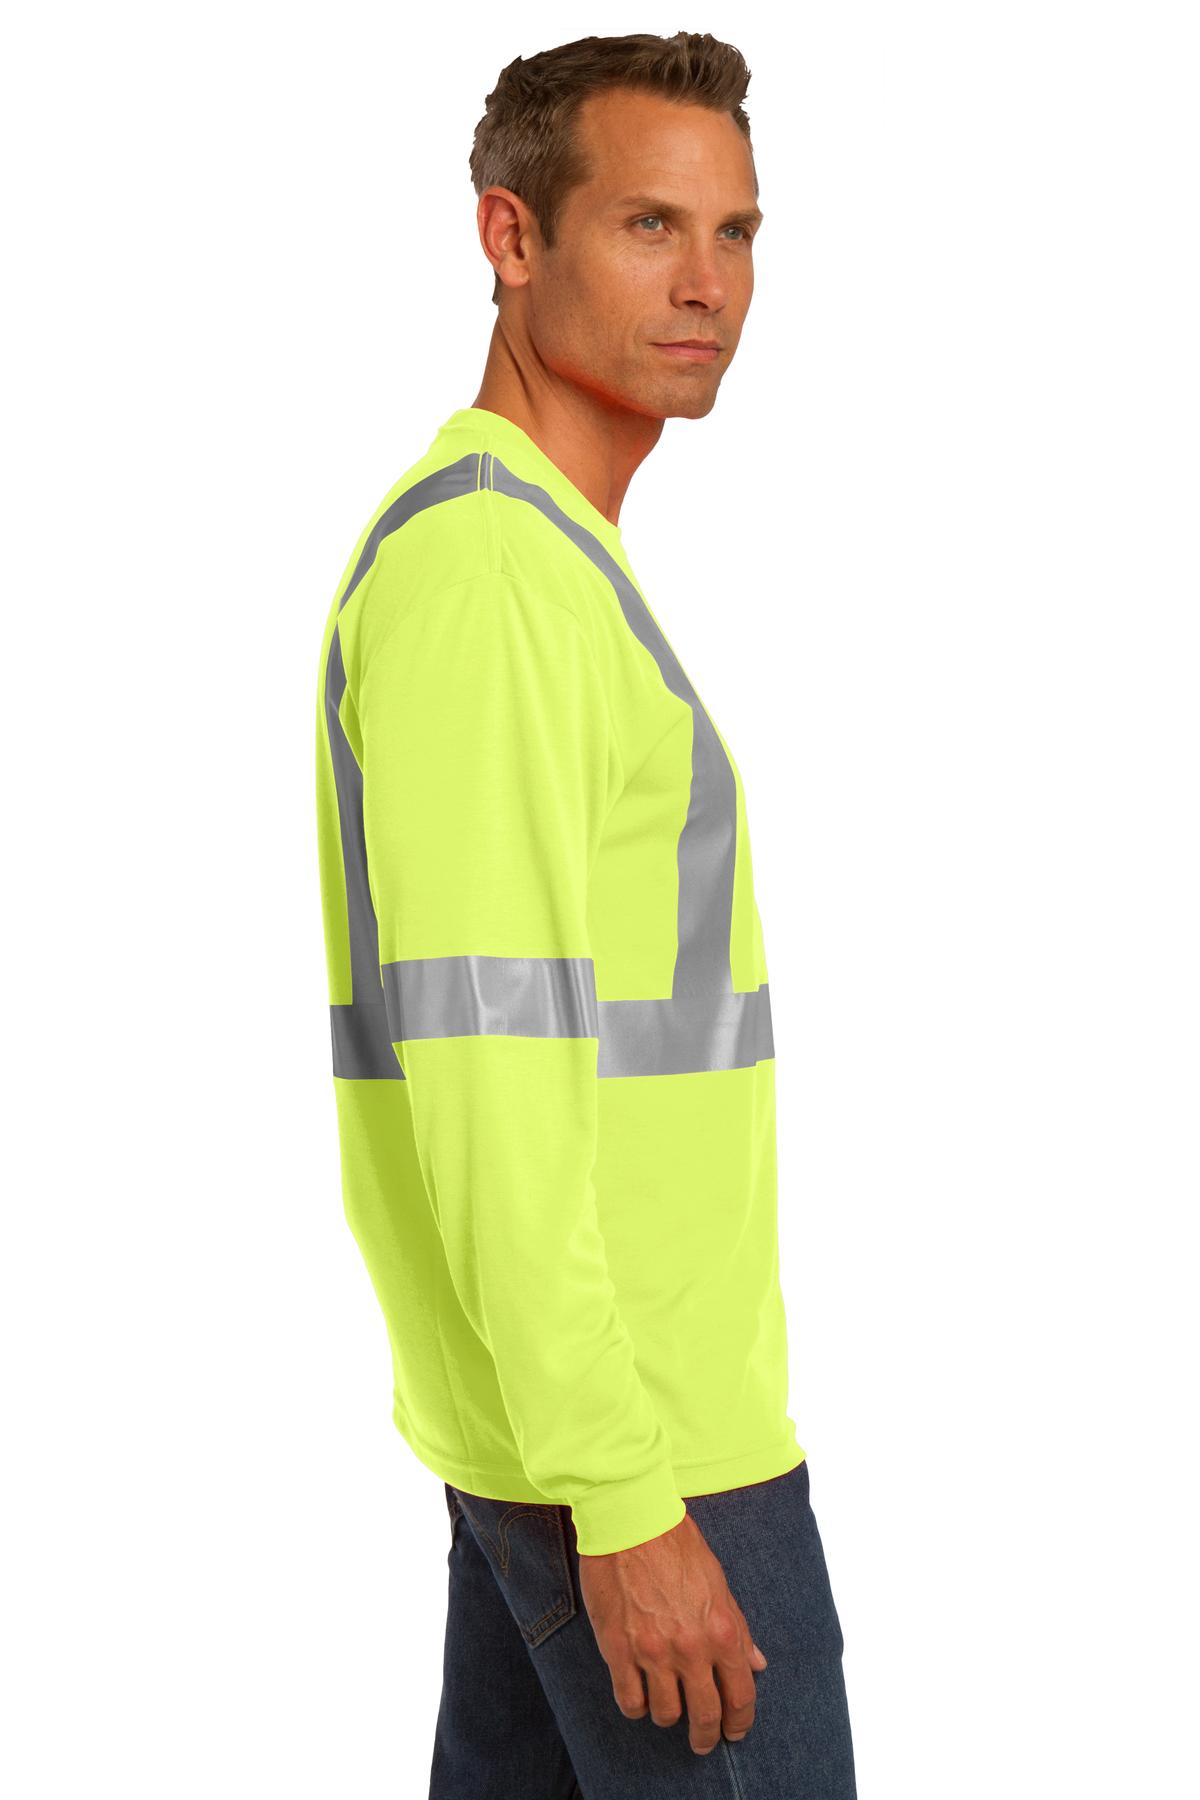 Safety Yellow/ Reflective